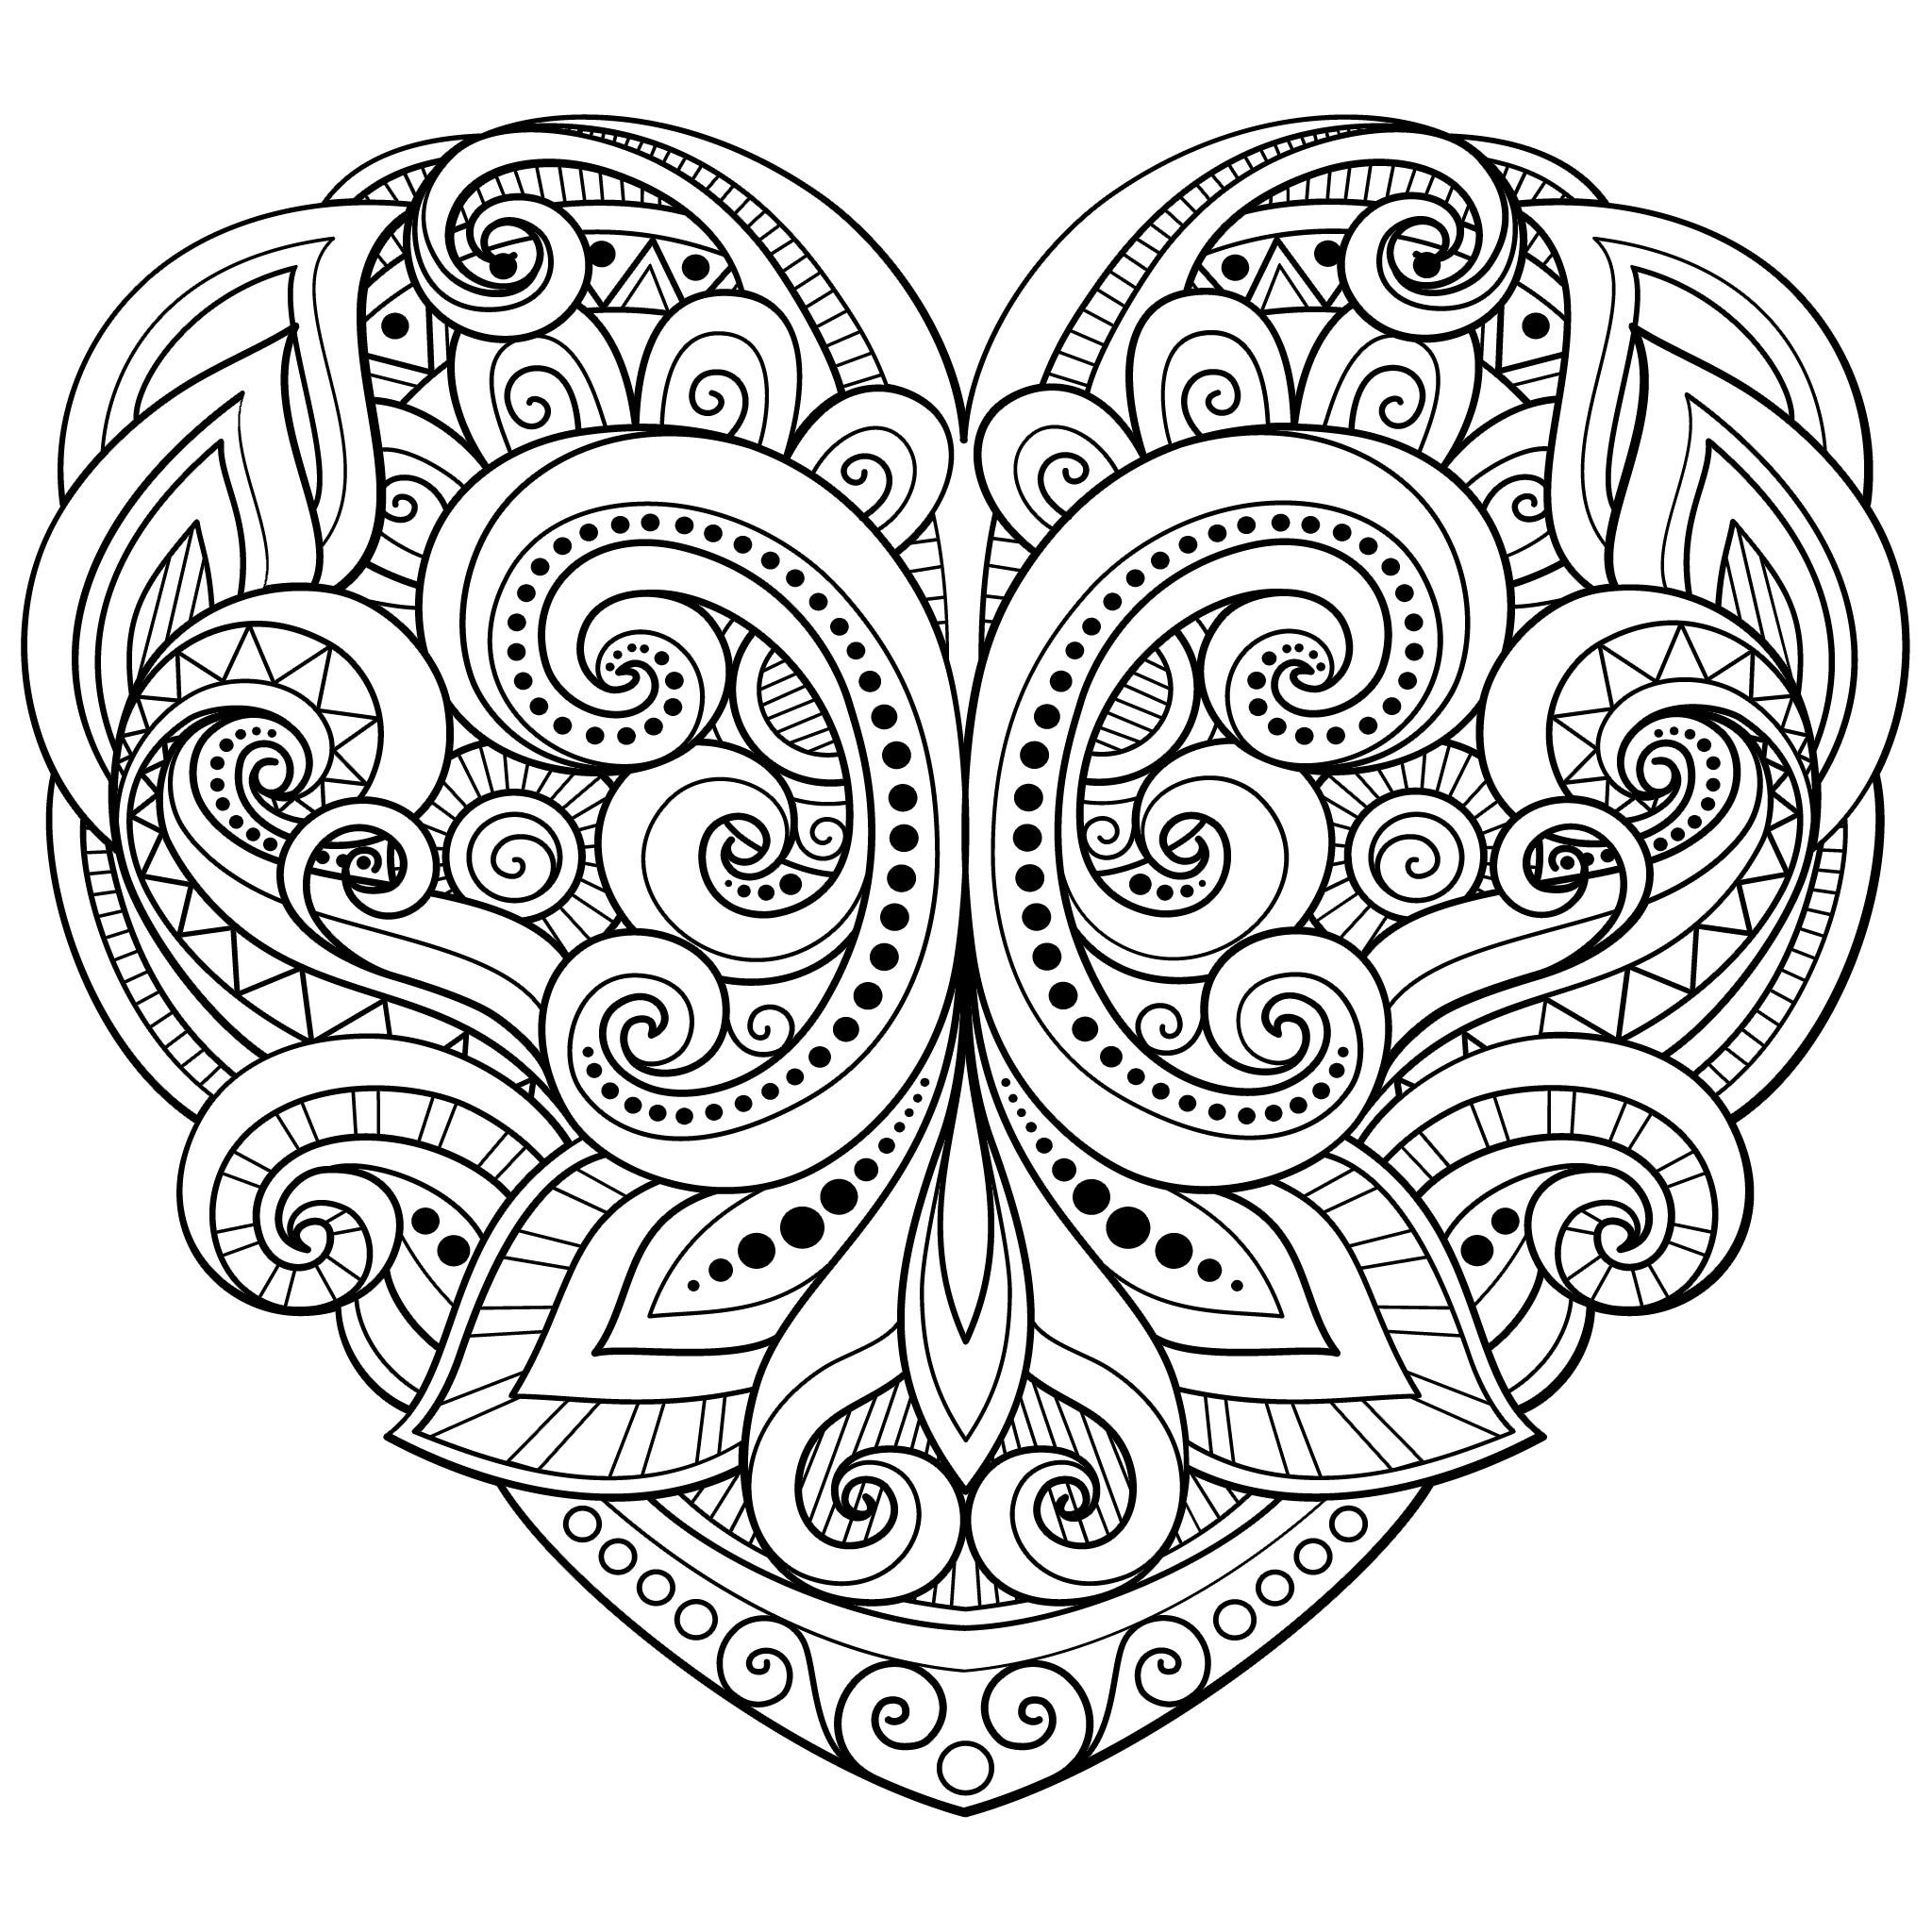 Printable Coloring Pages For Adults Love
 Love heart coloring page